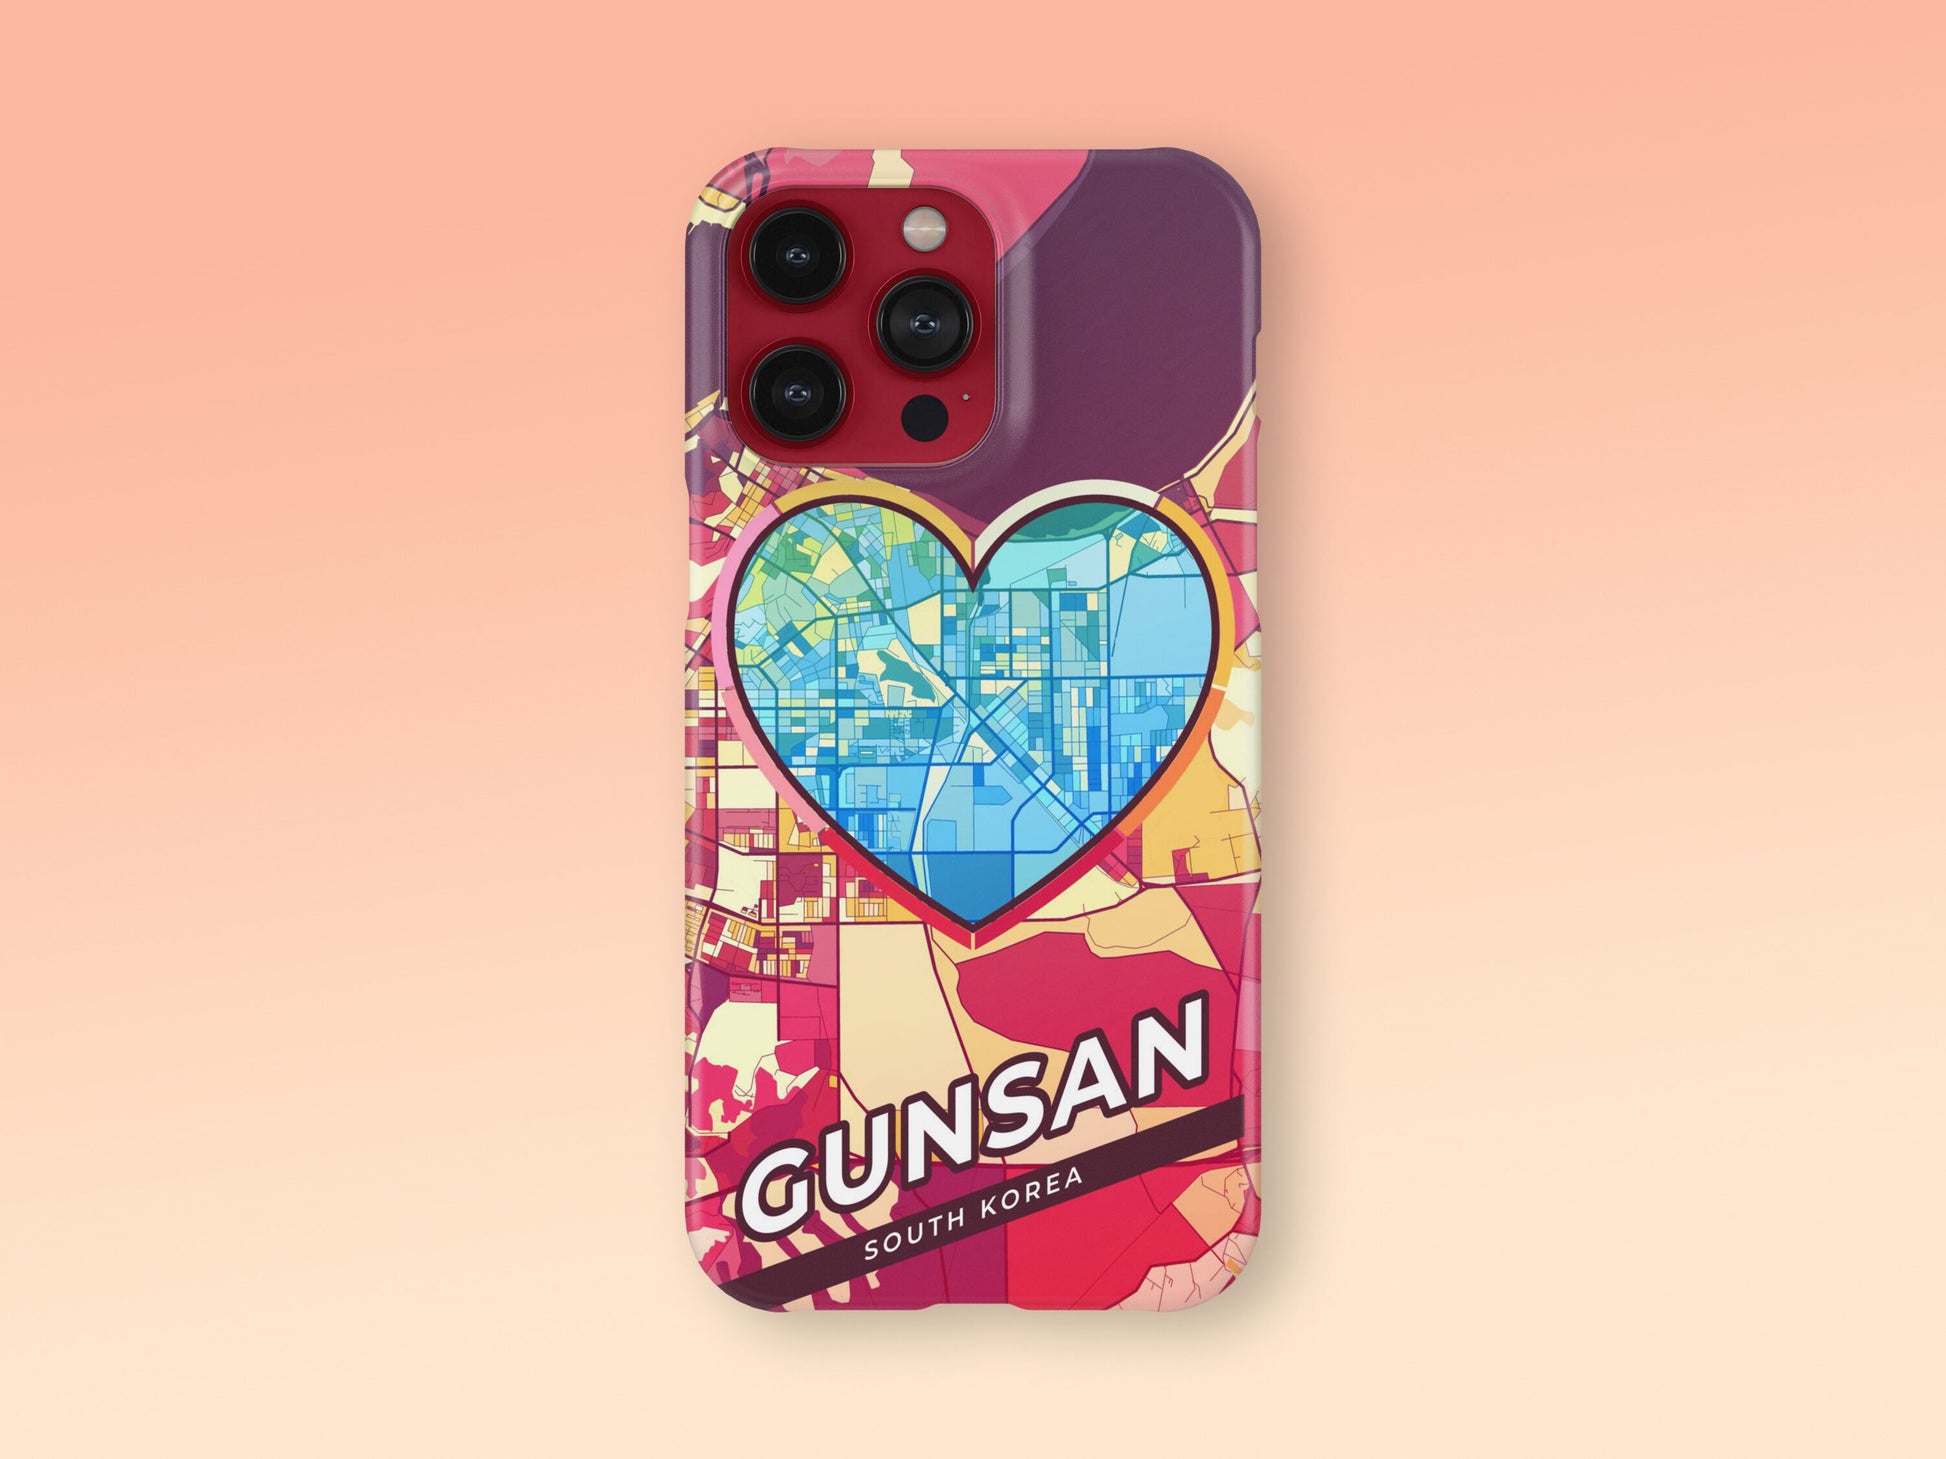 Gunsan South Korea slim phone case with colorful icon. Birthday, wedding or housewarming gift. Couple match cases. 2